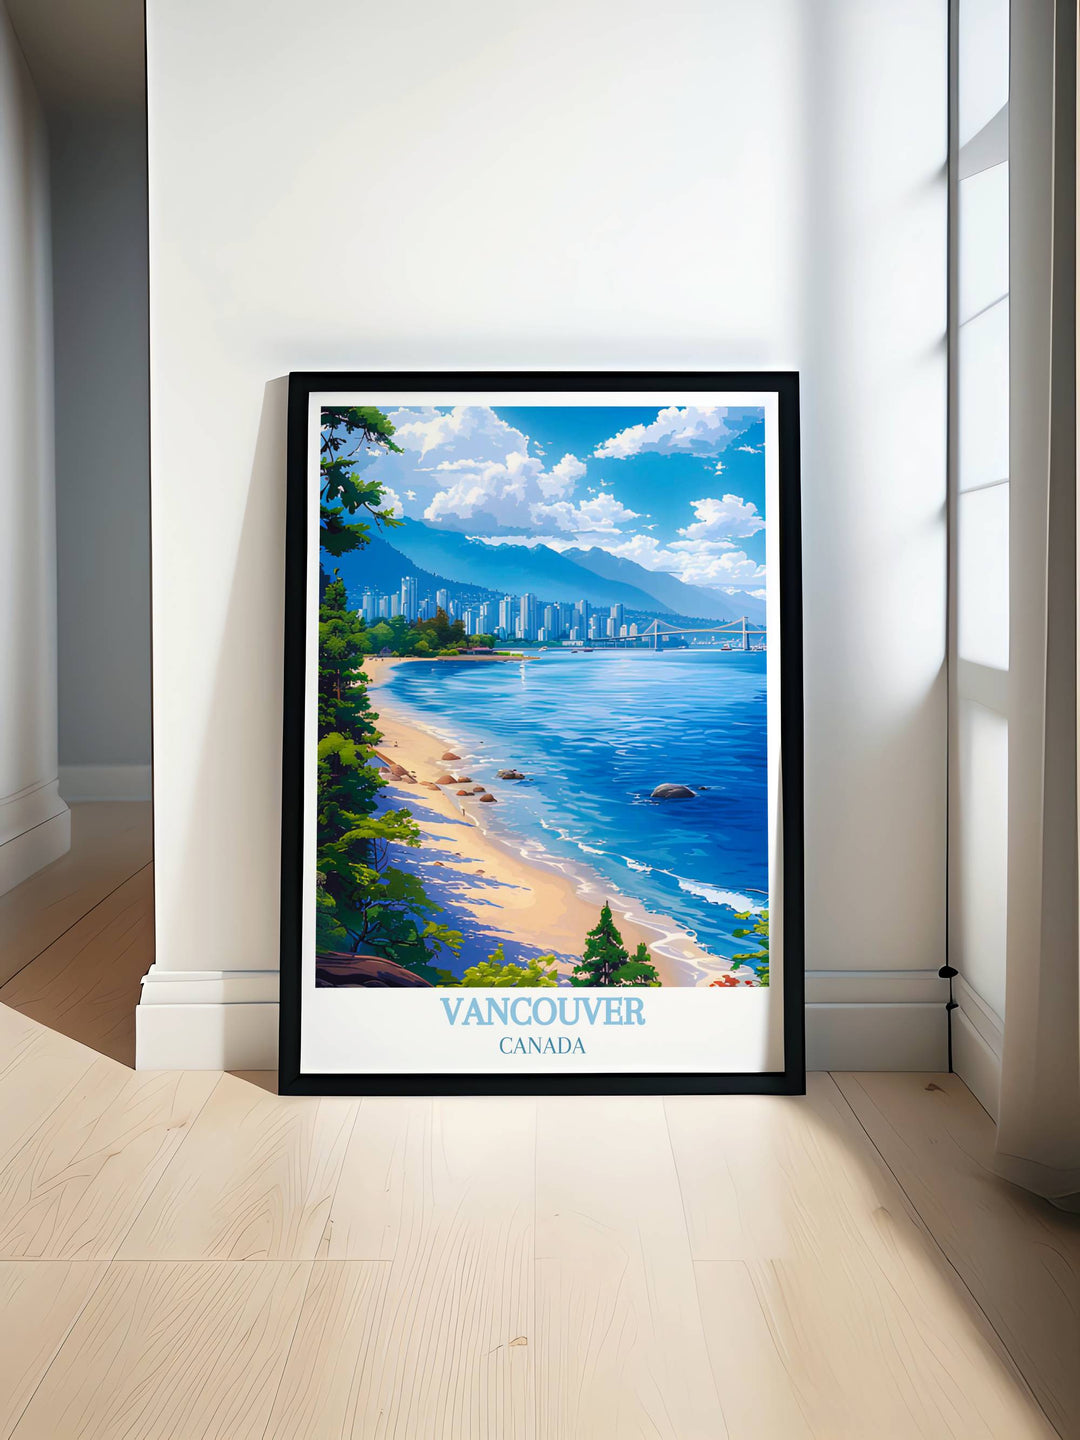 Vancouver modern wall decor showcasing the citys sleek urban landscapes and natural beauty. Perfect for adding sophistication to any home or office.